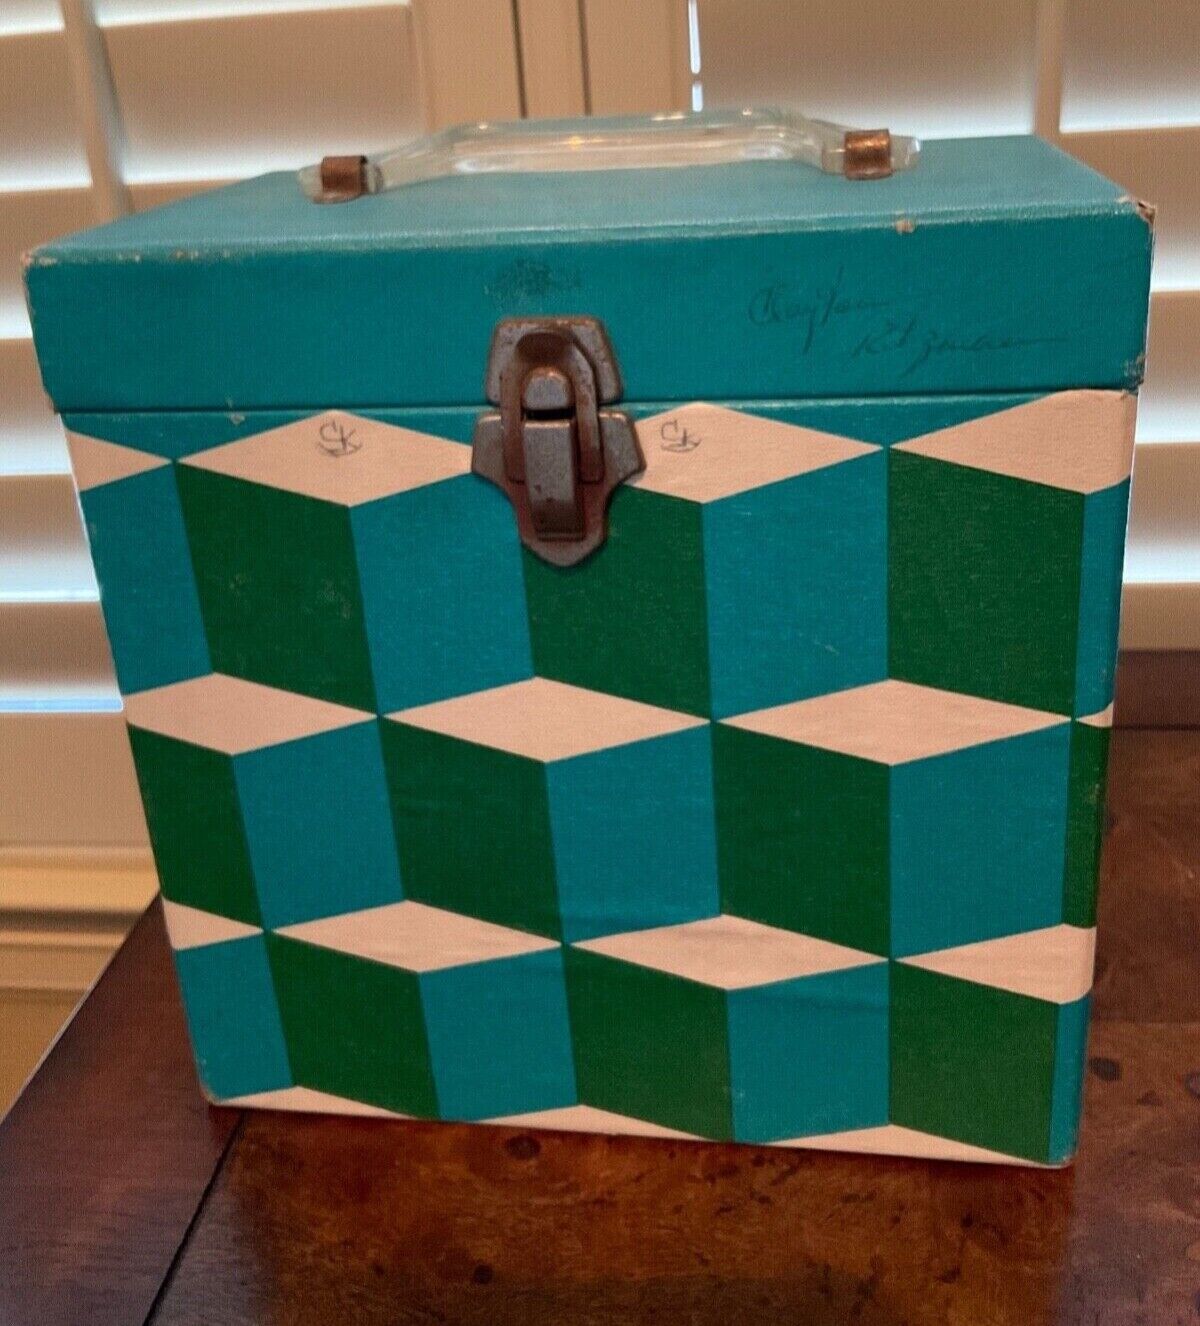 VTG 60s Psychedelic Record Case Green & White Abstract Cubes + 31 Records